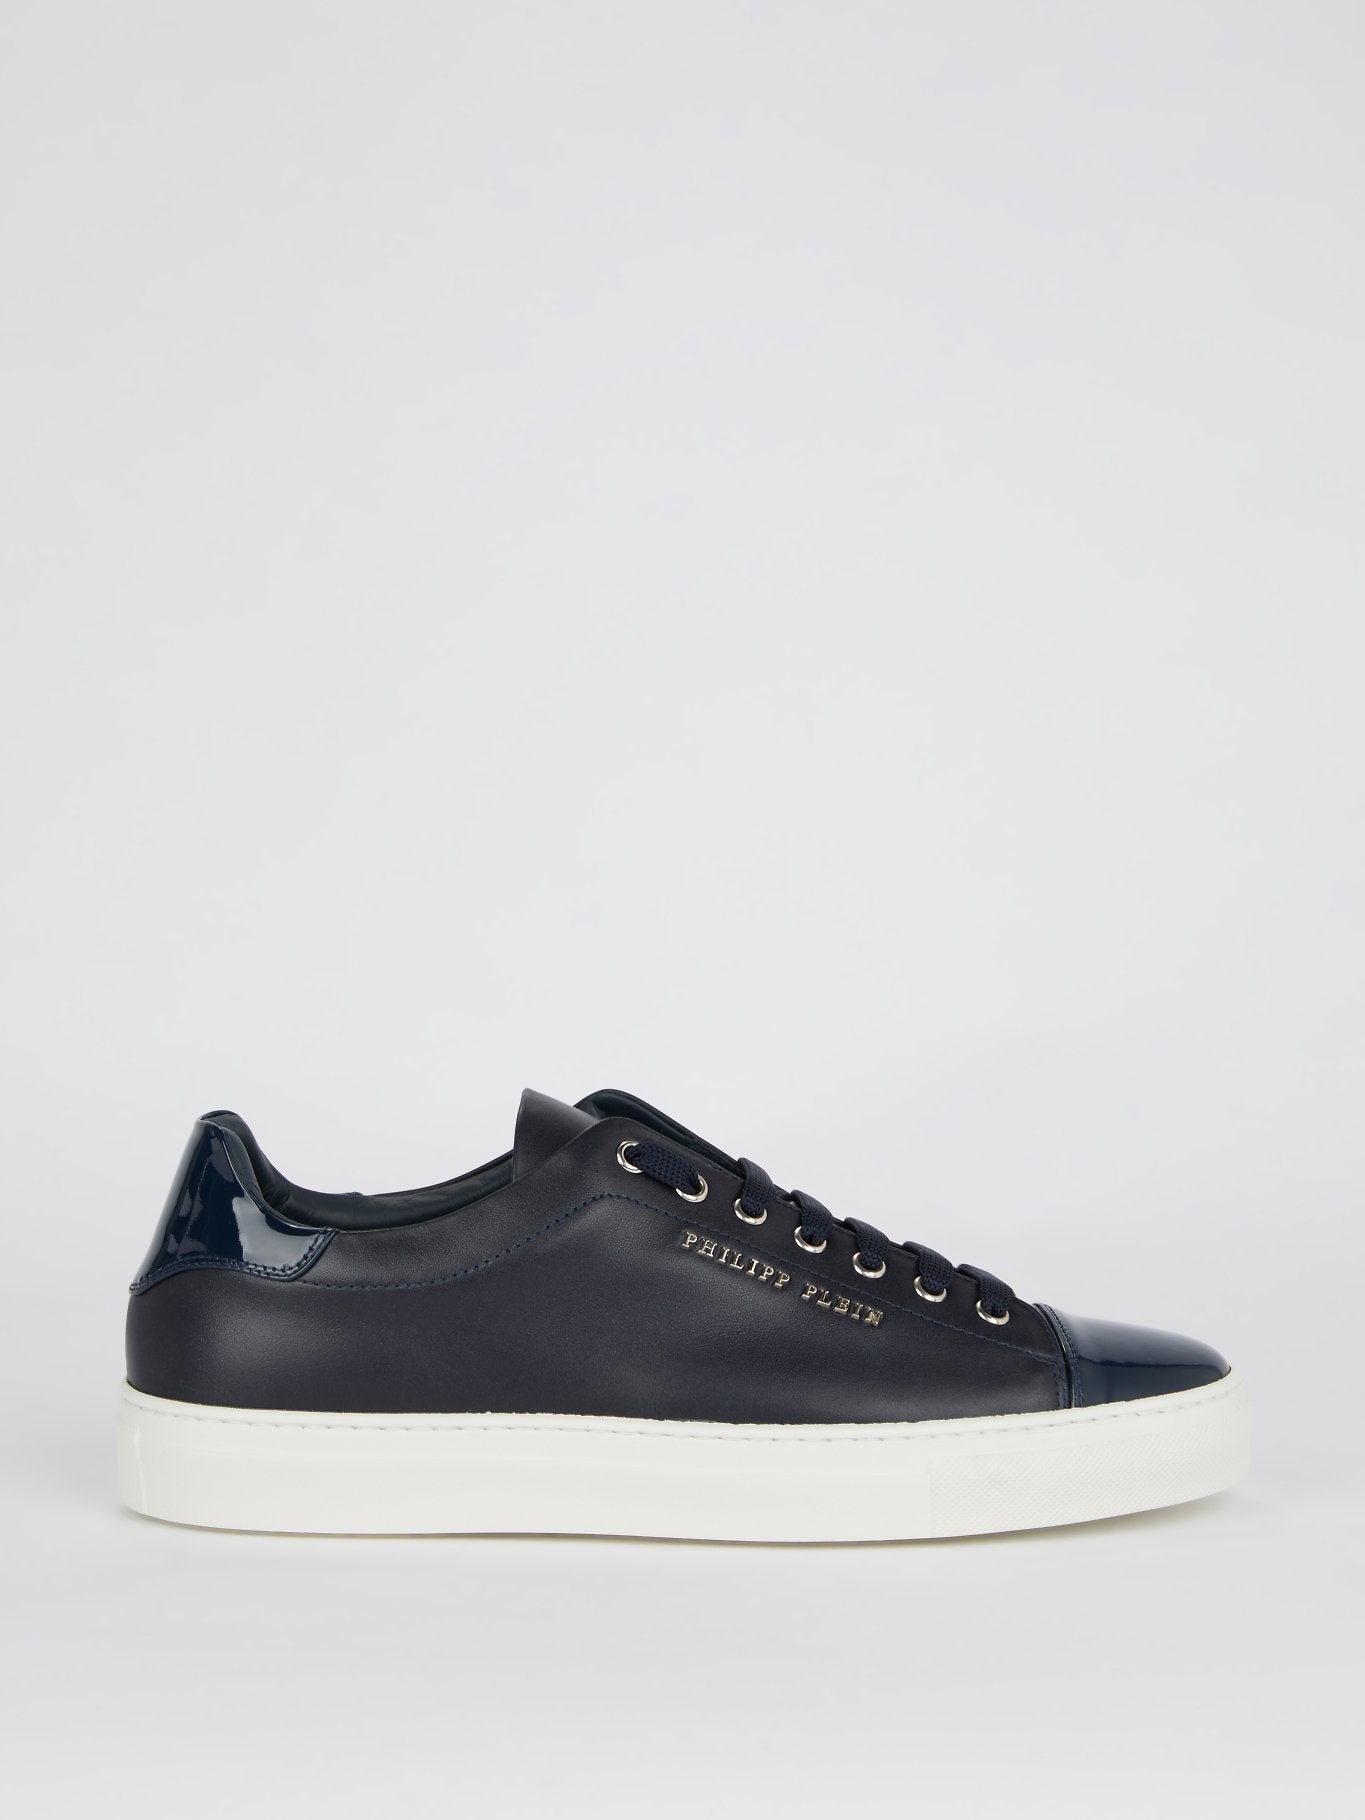 Navy Patent Leather Heel and Toe Patch Sneakers